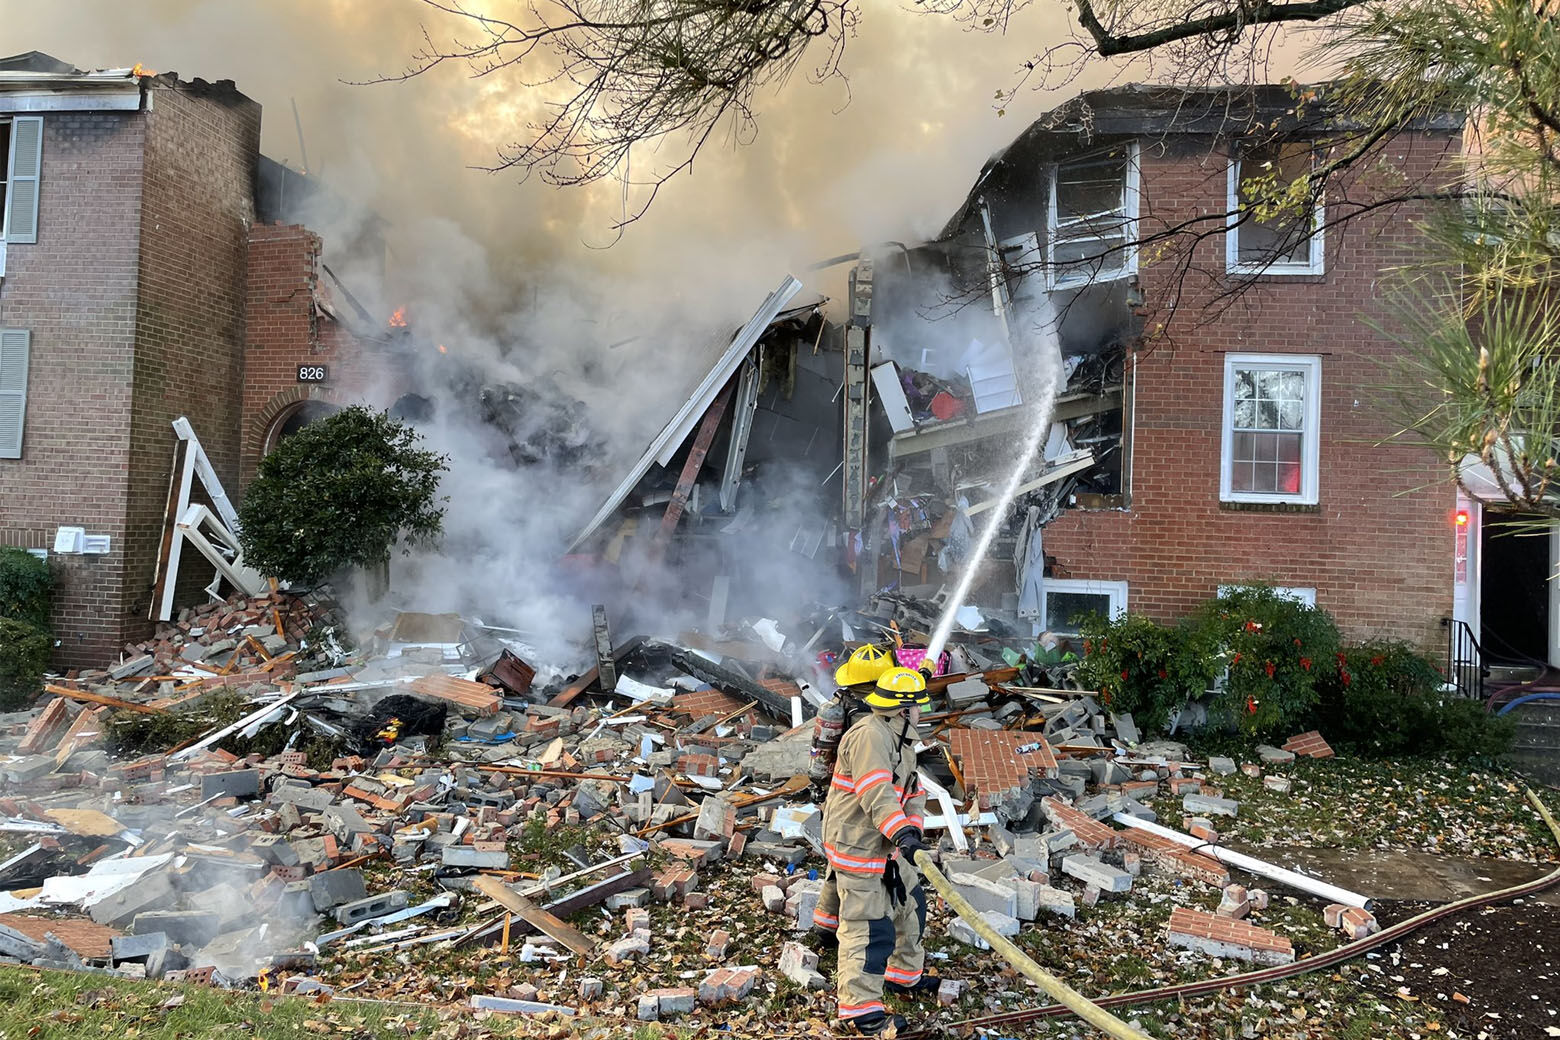 <h3>2 catastrophic blasts</h3>
<p>Two blasts. Two massive fires. Parts of two housing complexes reduced to smoldering rubble.</p>
<p>It turned out to be no more than an unfortunate coincidence — but Montgomery County, Maryland, saw two different fiery apartment blasts in 2022.</p>
<p>And while the explosions injured several and displaced dozens, no one — miraculously — was killed in either incident.</p>
<p>The first happened March 3, at the Friendly Garden Apartments in Silver Spring, where the <a href="https://wtop.com/montgomery-county/2022/03/fire-apartment-building-collapse-in-silver-spring/" target="_blank" rel="noopener">explosion and fire ripped through three buildings</a> about 10:30 a.m. More than a dozen people were taken to the hospital and three buildings were declared uninhabitable.</p>
<p>The cause of the blast? A maintenance worker, trying to unclog a drain cut, <a href="https://wtop.com/montgomery-county/2022/03/human-error-possible-in-friendly-garden-apts-explosion/" target="_blank" rel="noopener">mistakenly cut a gas pipe</a> instead of a waste pipe, neither of which were marked.</p>
<p>Since then, county leaders have pushed utilities to label pipes in old buildings to prevent a similar occurrence in the future.</p>
<p>Then, the week before Thanksgiving, there was <a href="https://wtop.com/montgomery-county/2022/11/fire-dept-building-fire-explosion-in-gaithersburg/" target="_blank" rel="noopener">another explosion</a>, this time at the Potomac Oaks Condominium in Gaithersburg.</p>
<p>“The entire building shook,” one witness described. “I’ve never experienced anything like this. It was a very terrifying experience.”</p>
<p>Another described “the biggest cloud of smoke” she’d ever seen outside her window.</p>
<p>More than a dozen people were injured, including two critically.</p>
<p>Crews searching the rubble in the days following discovered a body later identified as Juan Pablo Marshall Quizon, 36, who police said secretly bought a condo in the Potomac Oaks division and <a href="https://wtop.com/montgomery-county/2022/11/gaithersburg-condo-blast-man-found-dead-under-rubble-died-by-suicide/" target="_blank" rel="noopener">then took his own life</a>, resulting in the blast.</p>
<p>Both blasts this year came in the wake of the devastating <a href="https://wtop.com/montgomery-county/2019/12/settlement-reached-in-2016-silver-spring-apartment-explosion/" target="_blank" rel="noopener">2016 explosion at the Flower Branch apartments</a>, which killed seven people, but officials were quick to note there was no connecting thread between any of the explosions — each was an ill-fated one-off.</p>
<p>No one  but Quizon was killed in the 2022 blasts, and officials thanked quick-thinking good Samaritans for helping rescue people at both explosion sites before fire crews arrived on the scene. They also counted their blessings: Both the 2022 blasts came after most children had left the house for school and parents had left for work.</p>
